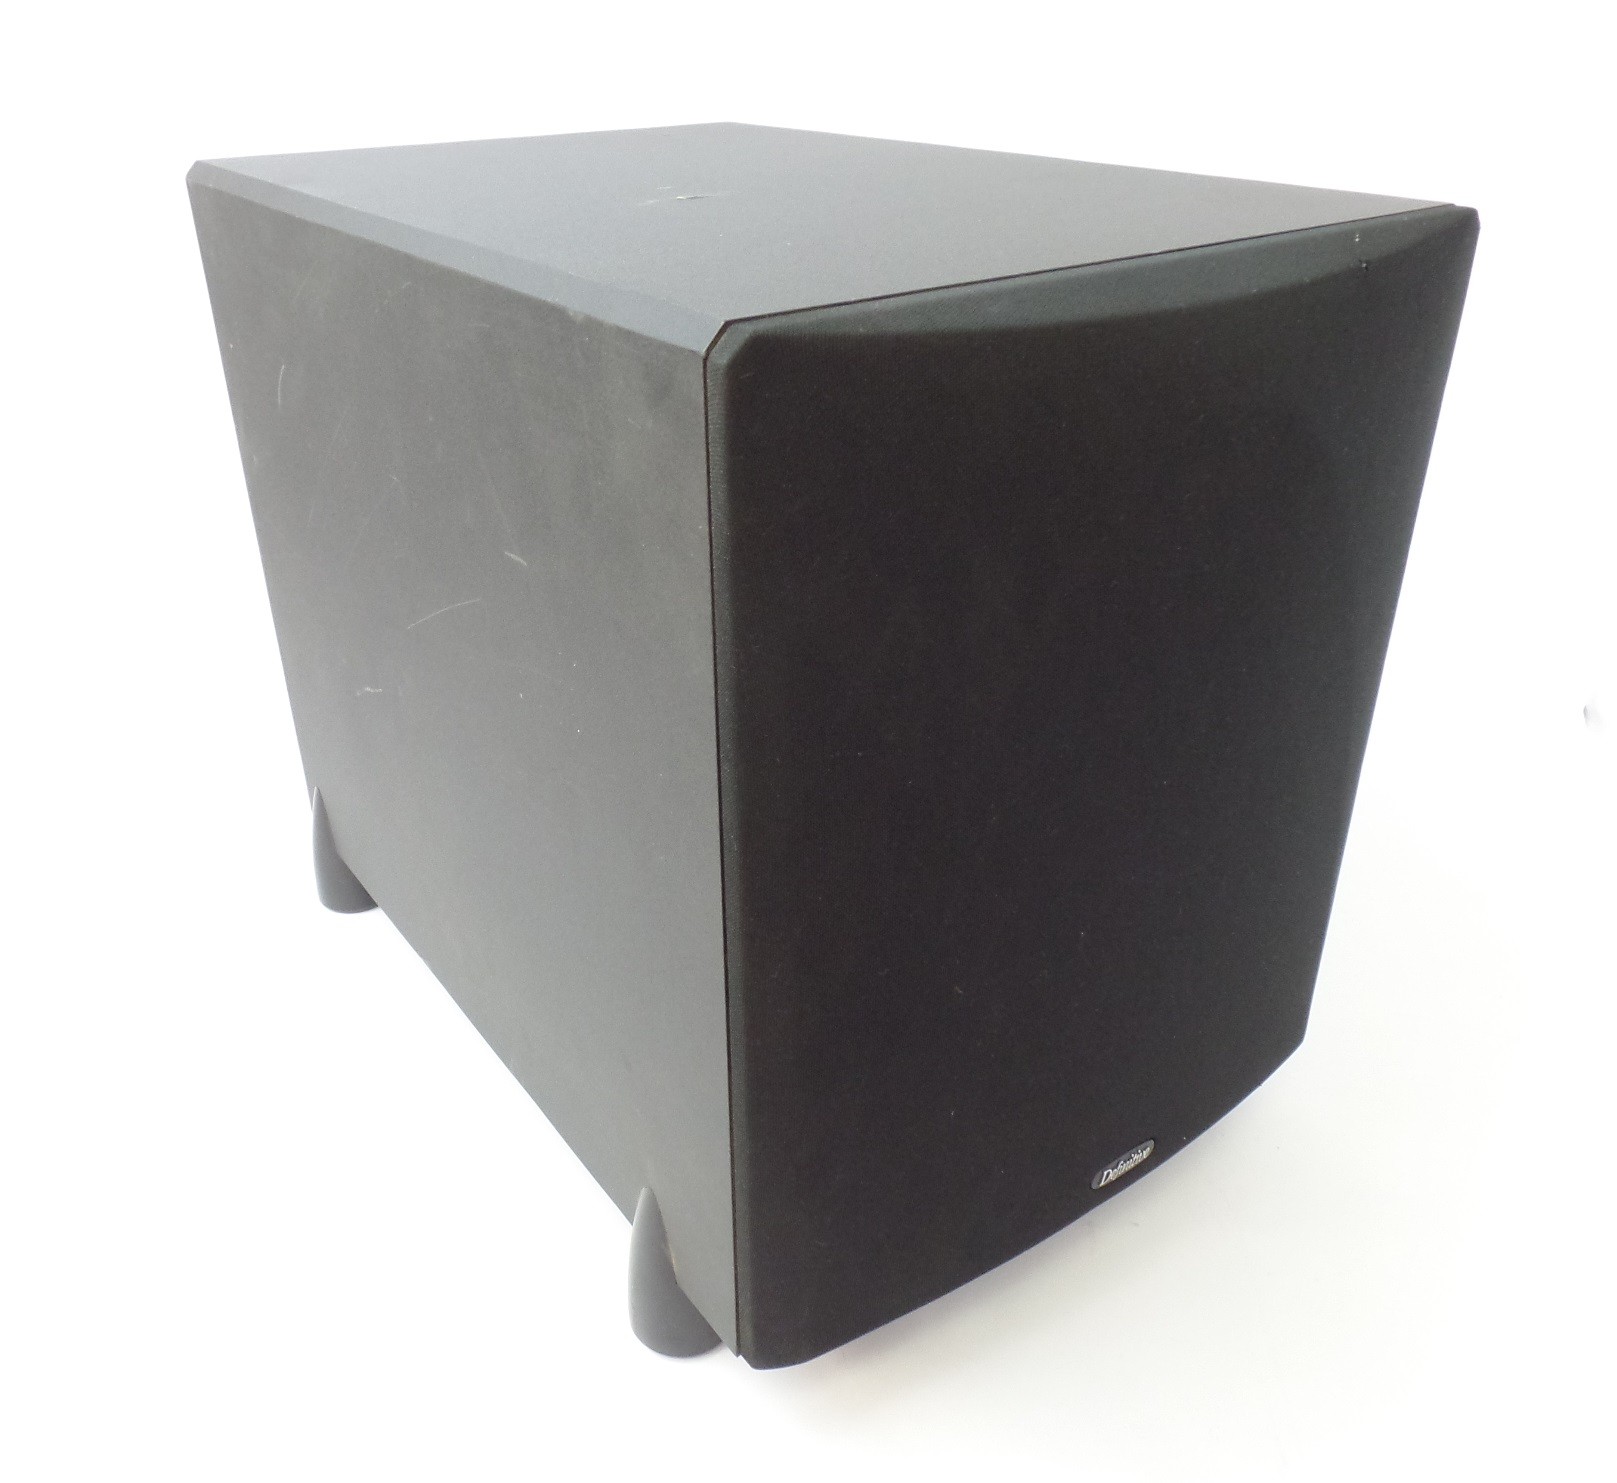 Read: No Sound, Definitive Technology ProSub 1000 10" Powered Subwoofer